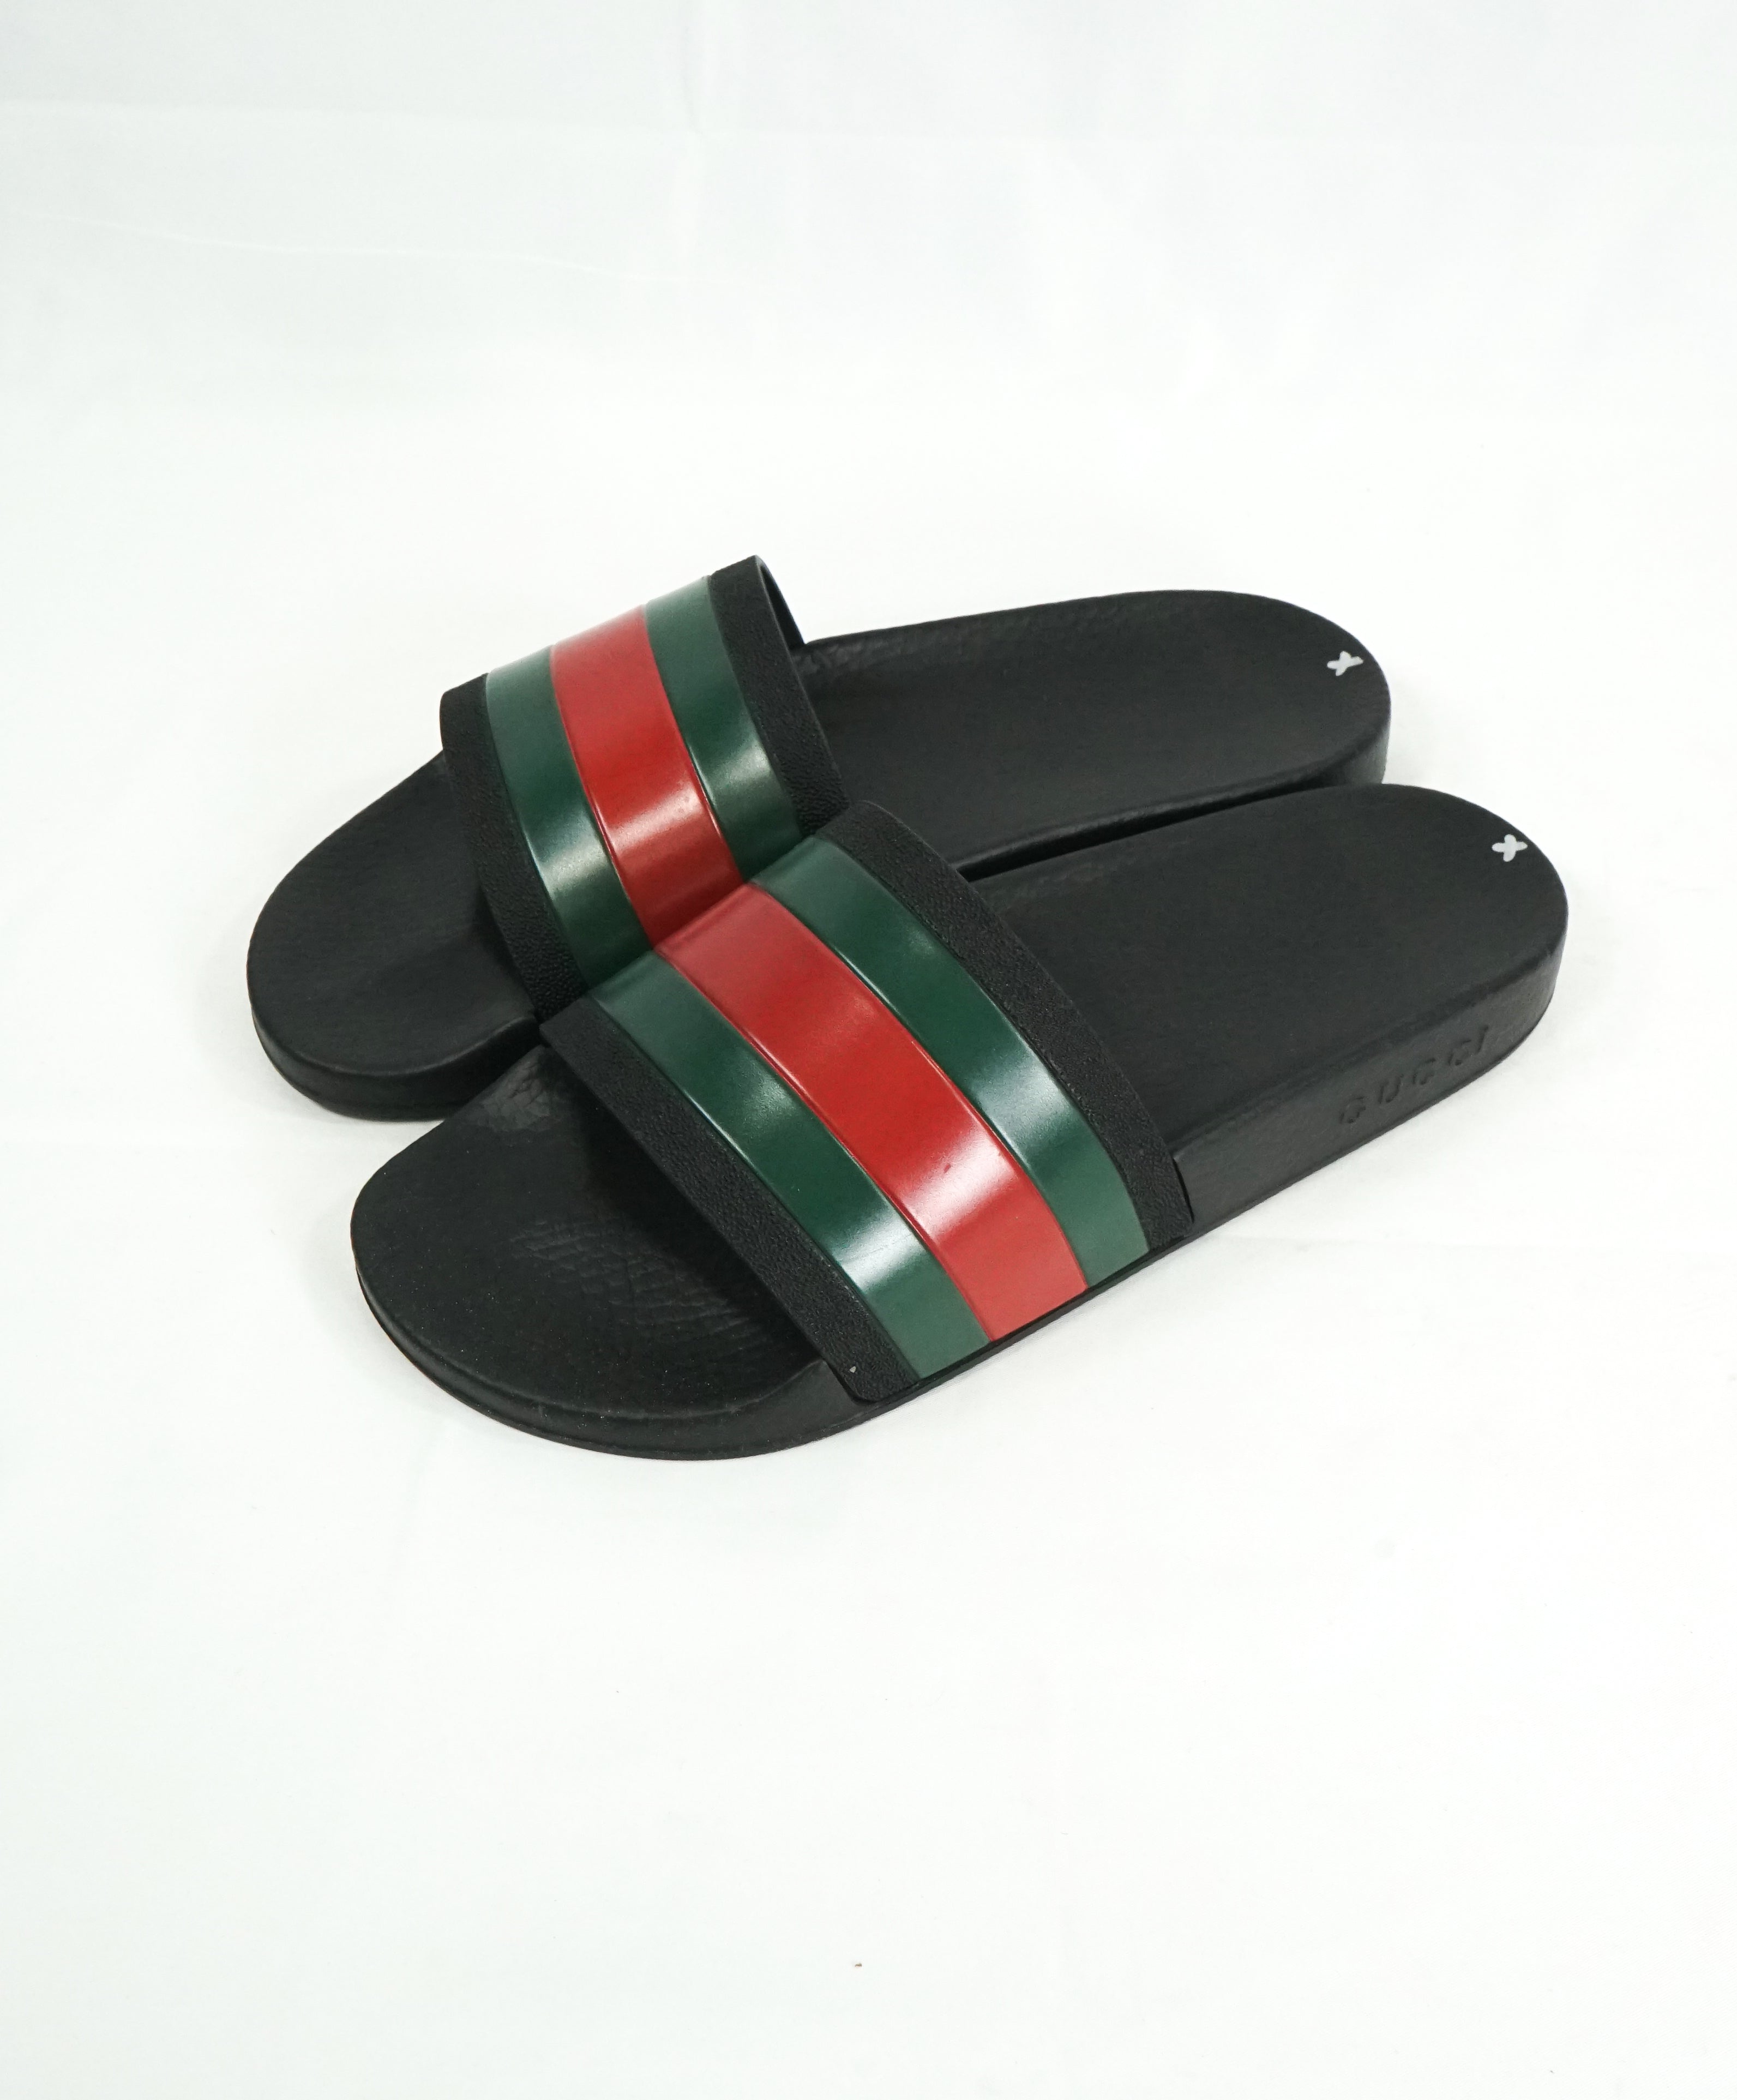 green and red gucci flip flops, OFF 76 